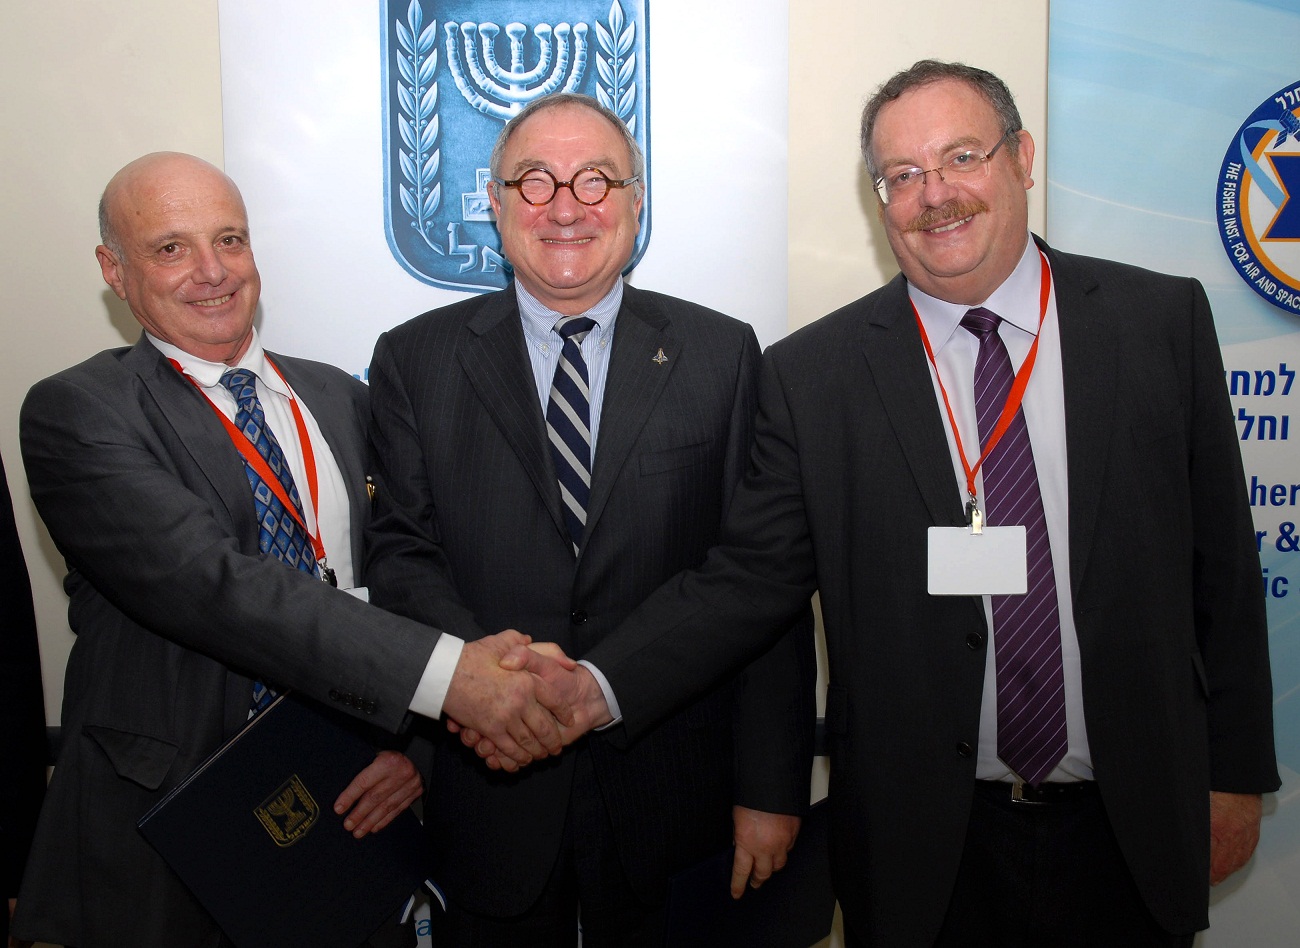 From right to left: Minister of Science, Prof. Daniel Hashkowitz, Jean-Jacques Durdin, head of the European Space Agency, Dr. Zvi Kaplan, former head of the Israeli Space Agency at the 2011 Ilan Ramon Space Conference